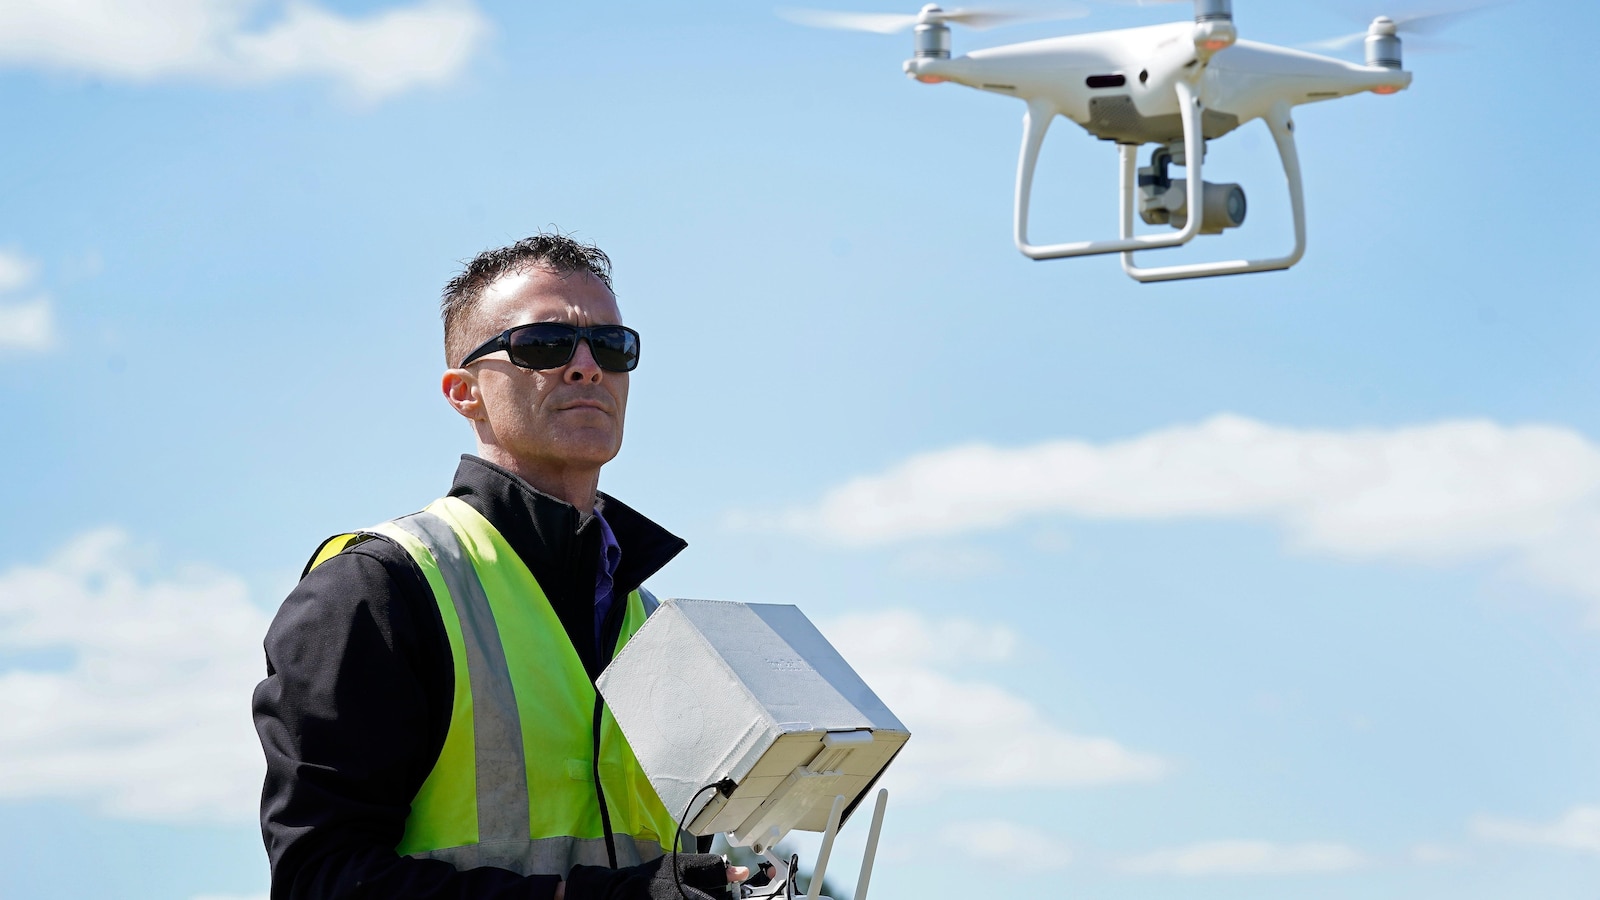 Drone pilot can't offer maps without North Carolina surveyor's license, court says